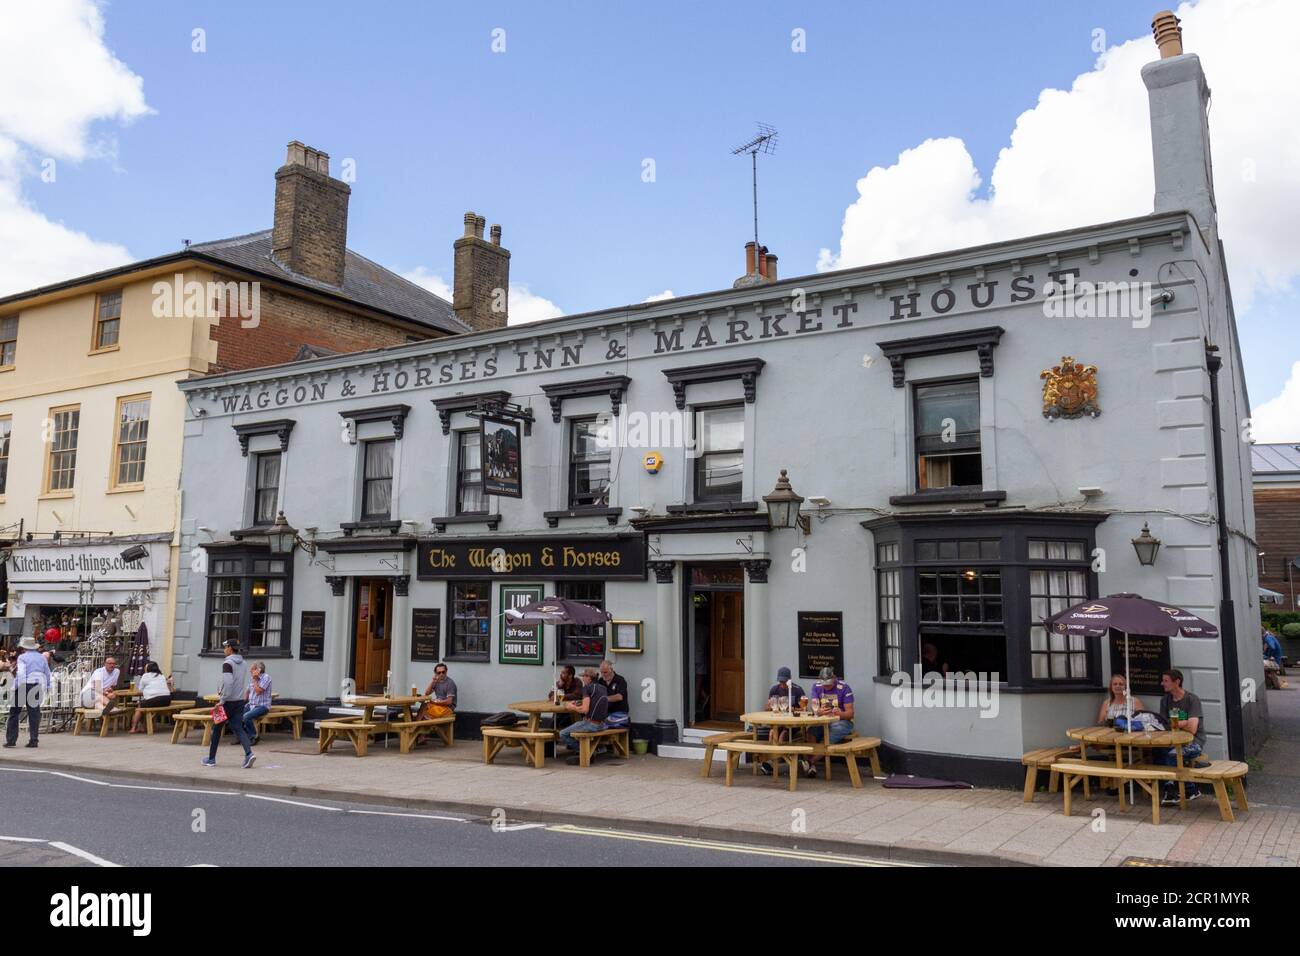 The Waggon & Horses Inn and market House public house on High Street, Newmarket, Suffolk, UK. Stock Photo